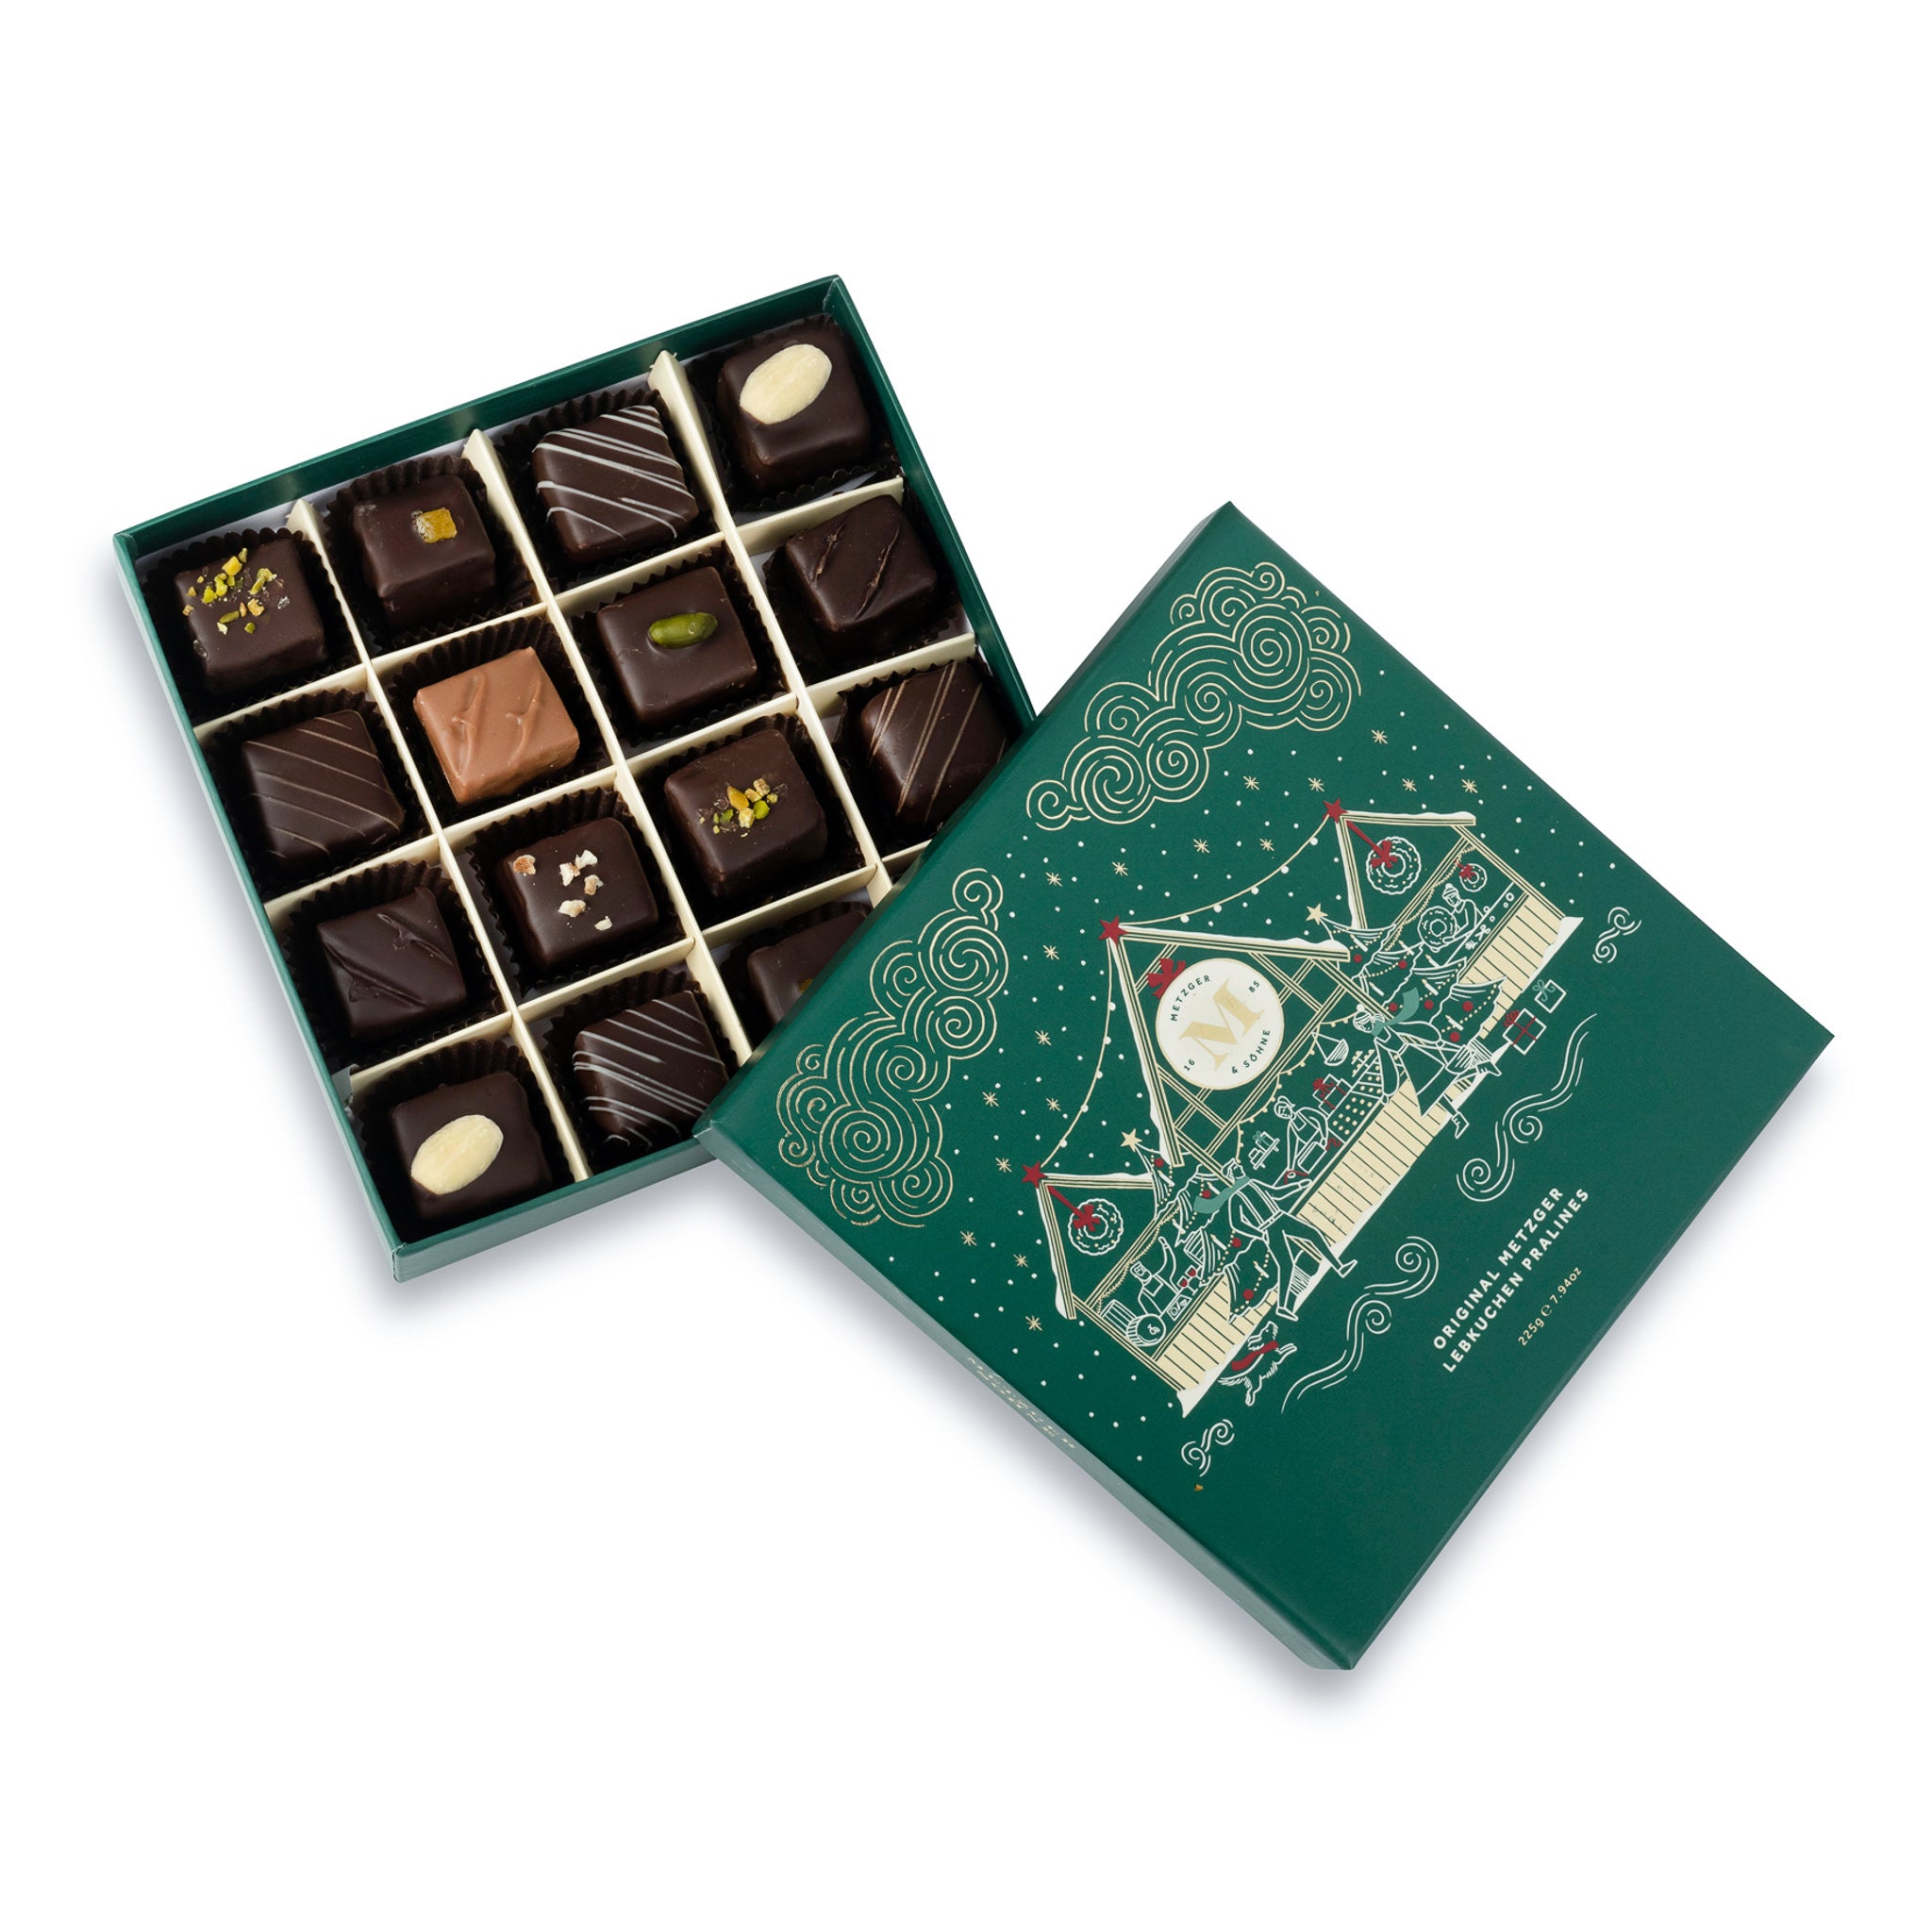 Exclusive Christmas Lebkuchen 'Honey cake' praline box in emerald green with magical gold foil print, filled with 16 exquisite Lebkuchen pralines: marzipan, fruit jam or jelly and nutty flavours.